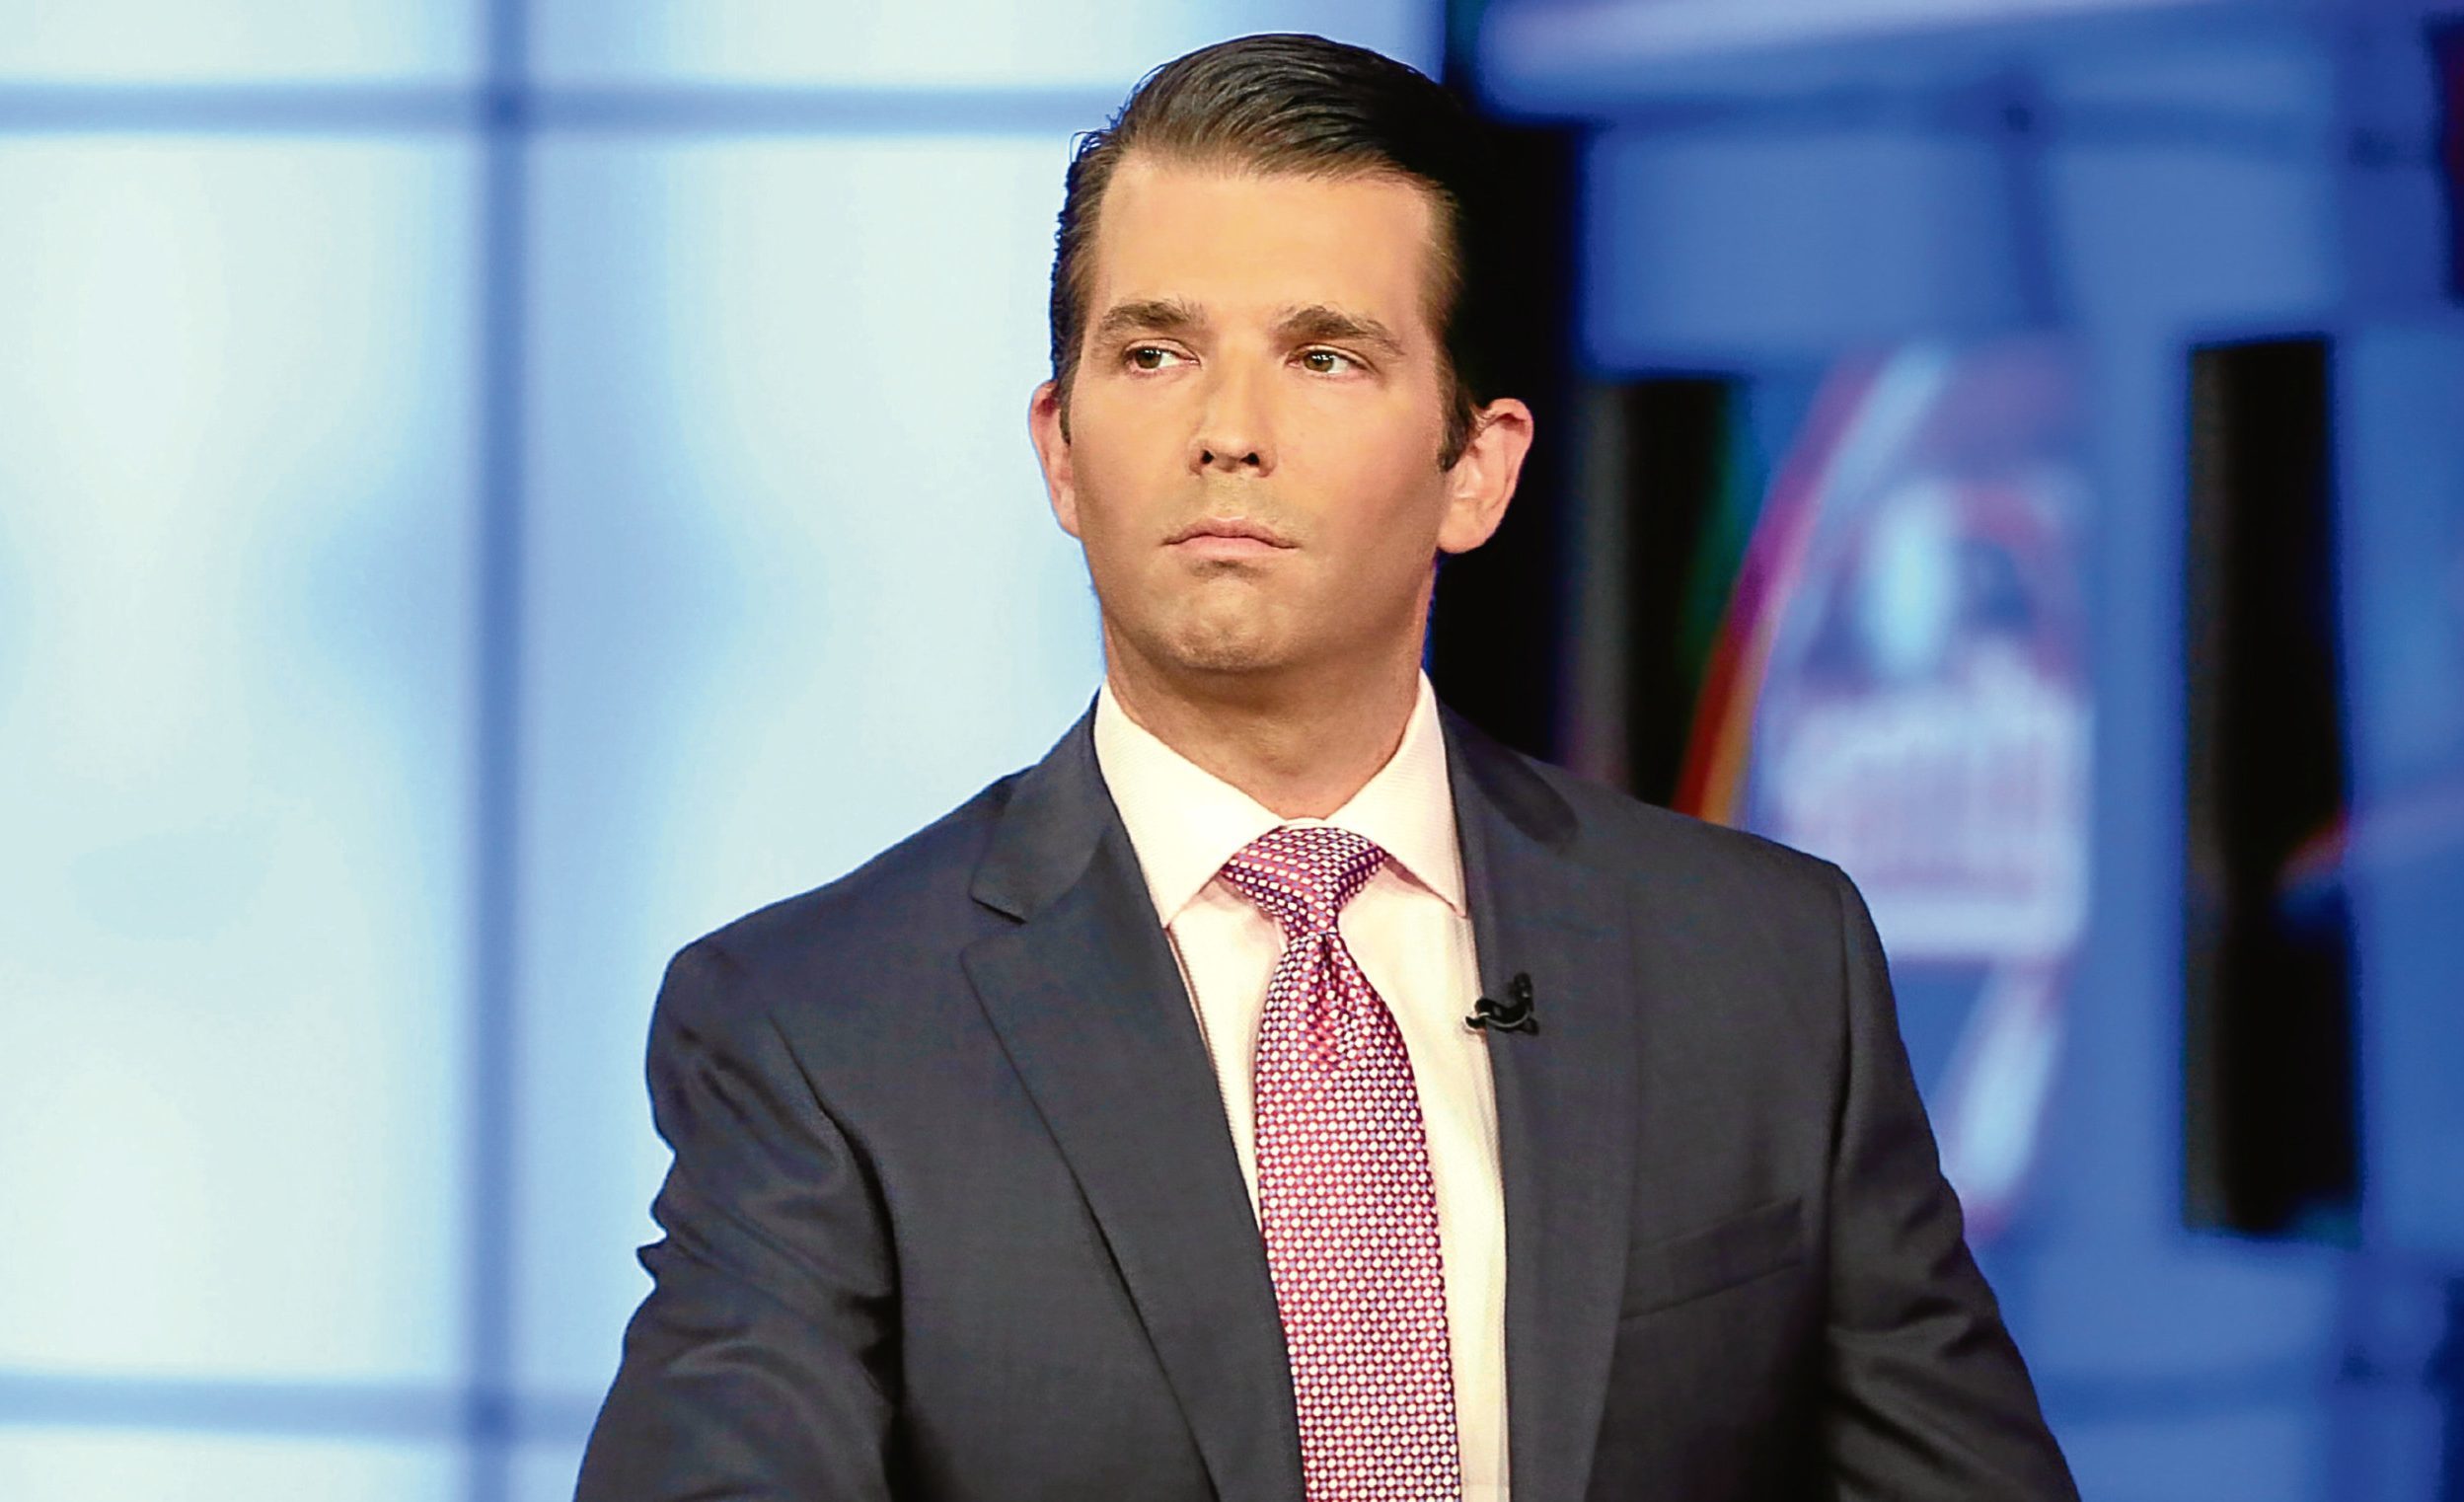 Donald Trump Jr is interviewed by host Sean Hannity on the Fox News Channel television program.